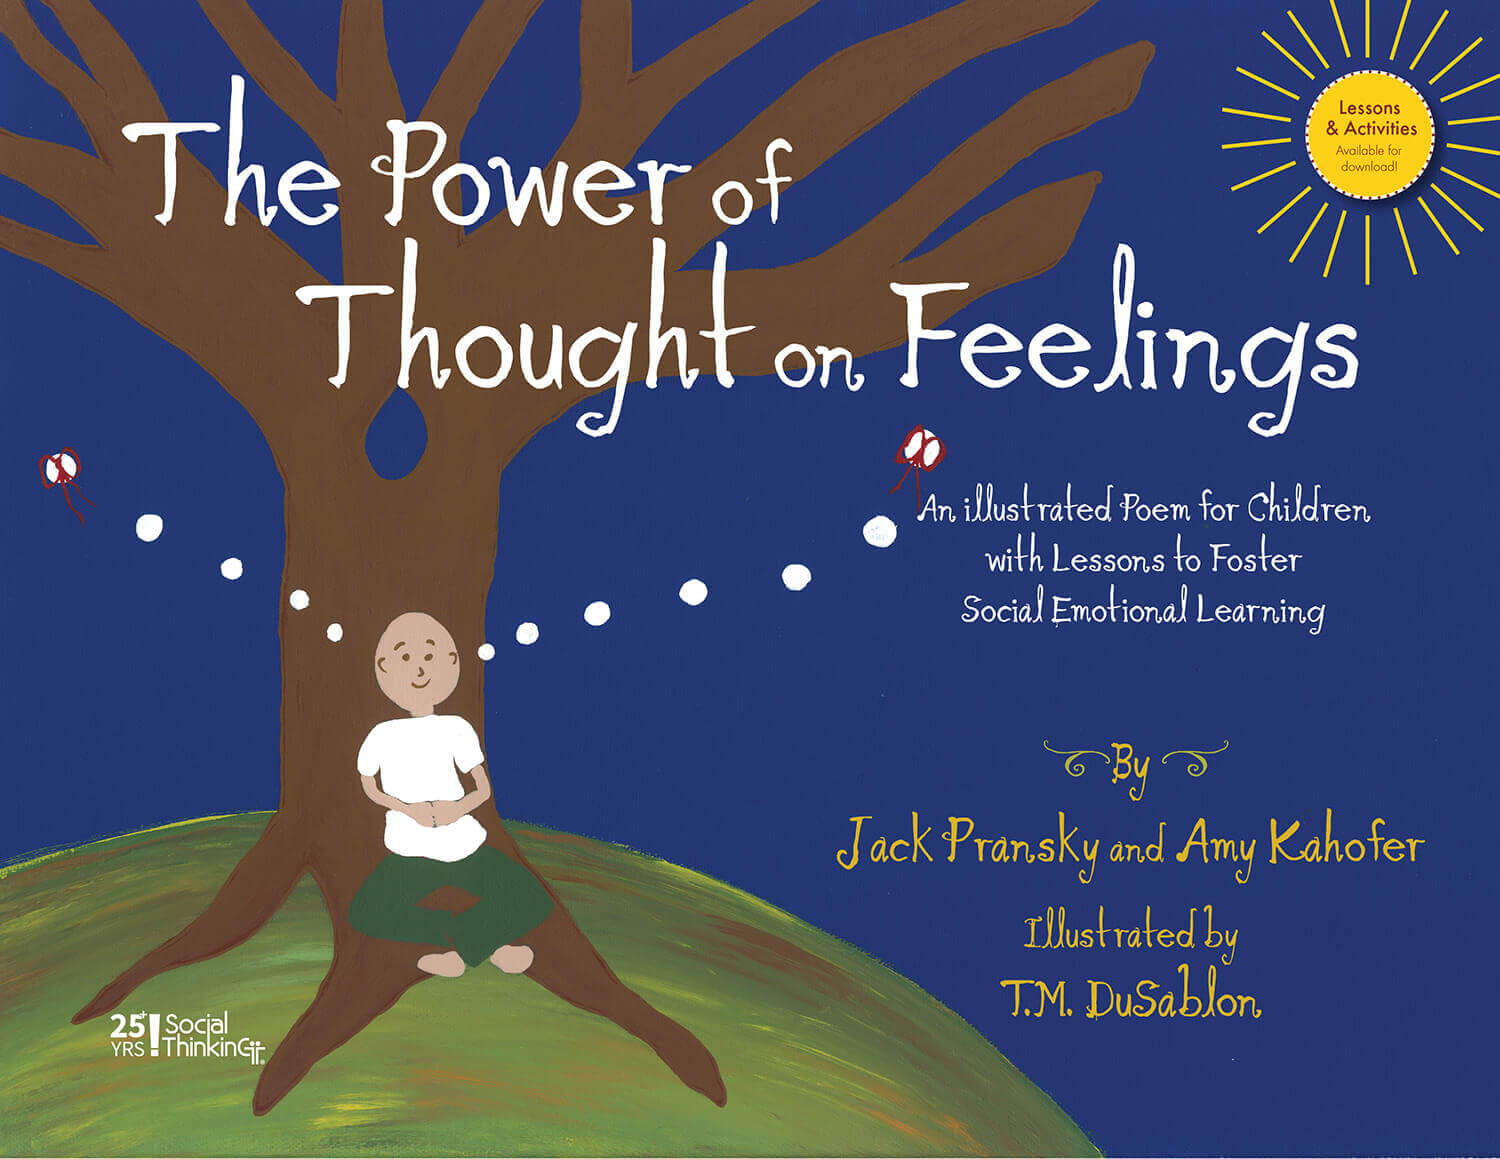 Socialthinking - The Power of Thought on Feelings